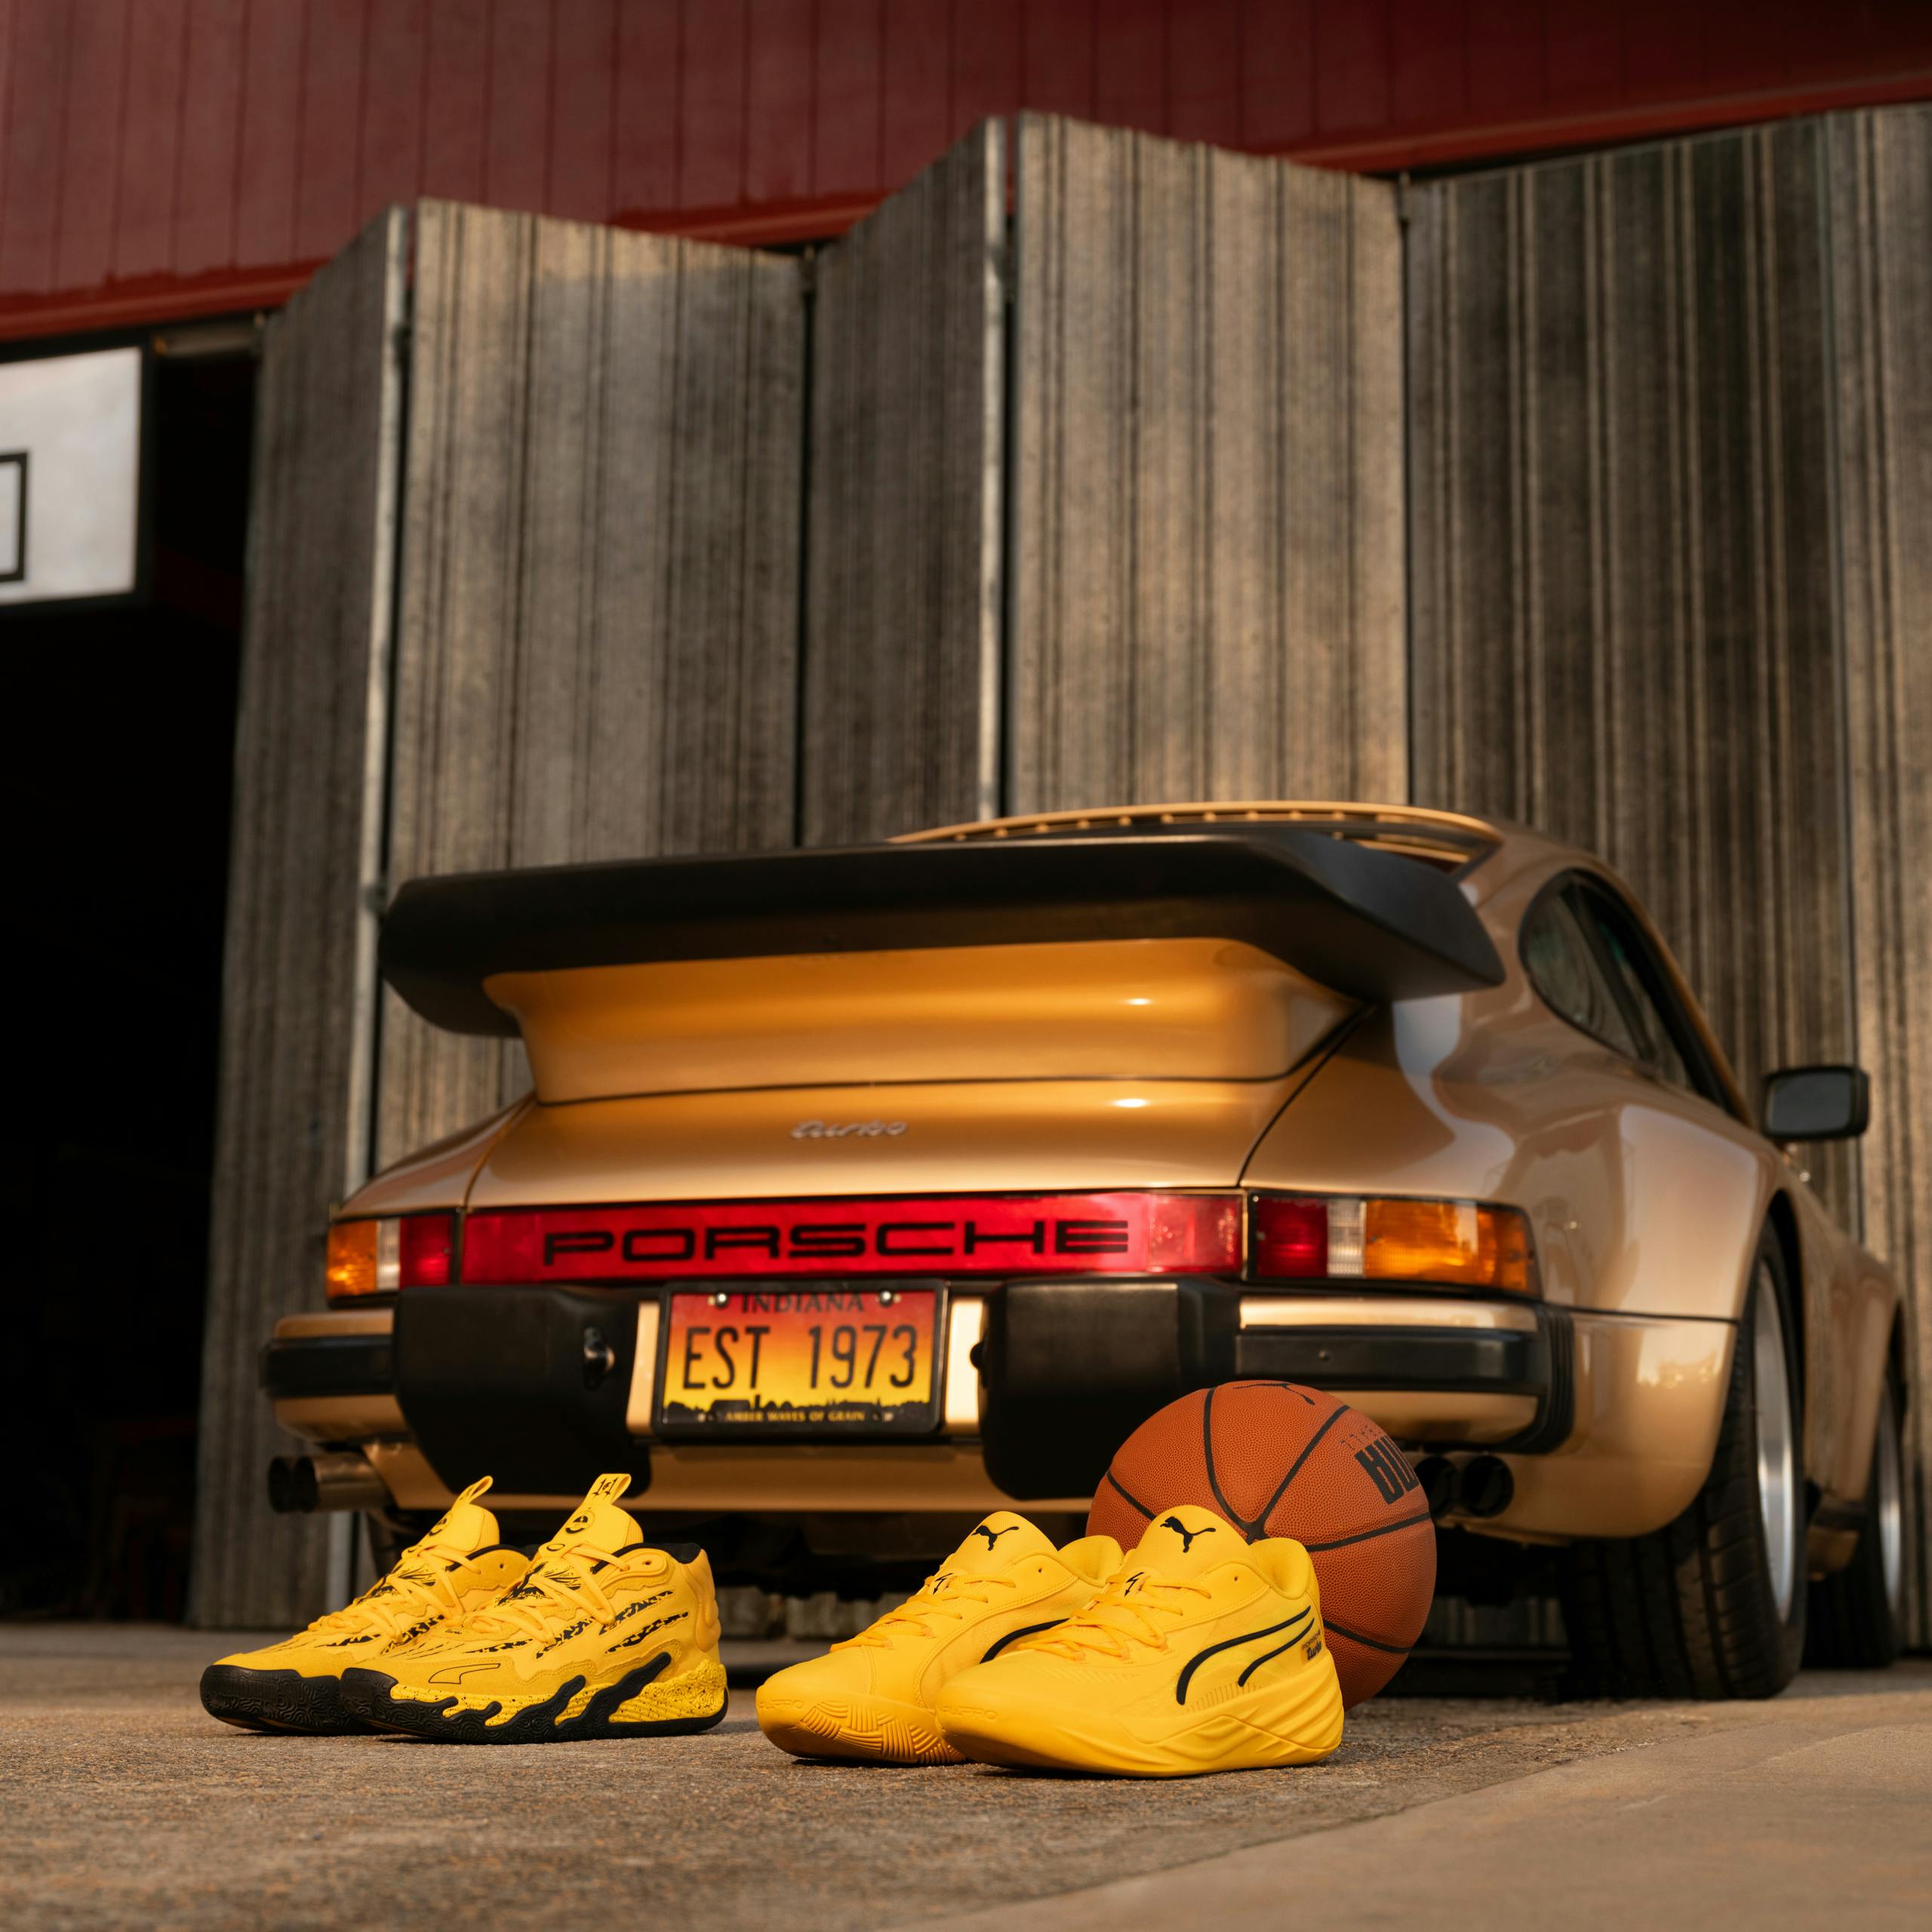 The image features a yellow Porsche Turbo car. It is parked in front of a building and has Porsche x Puma basketball shoes featured in the photo.